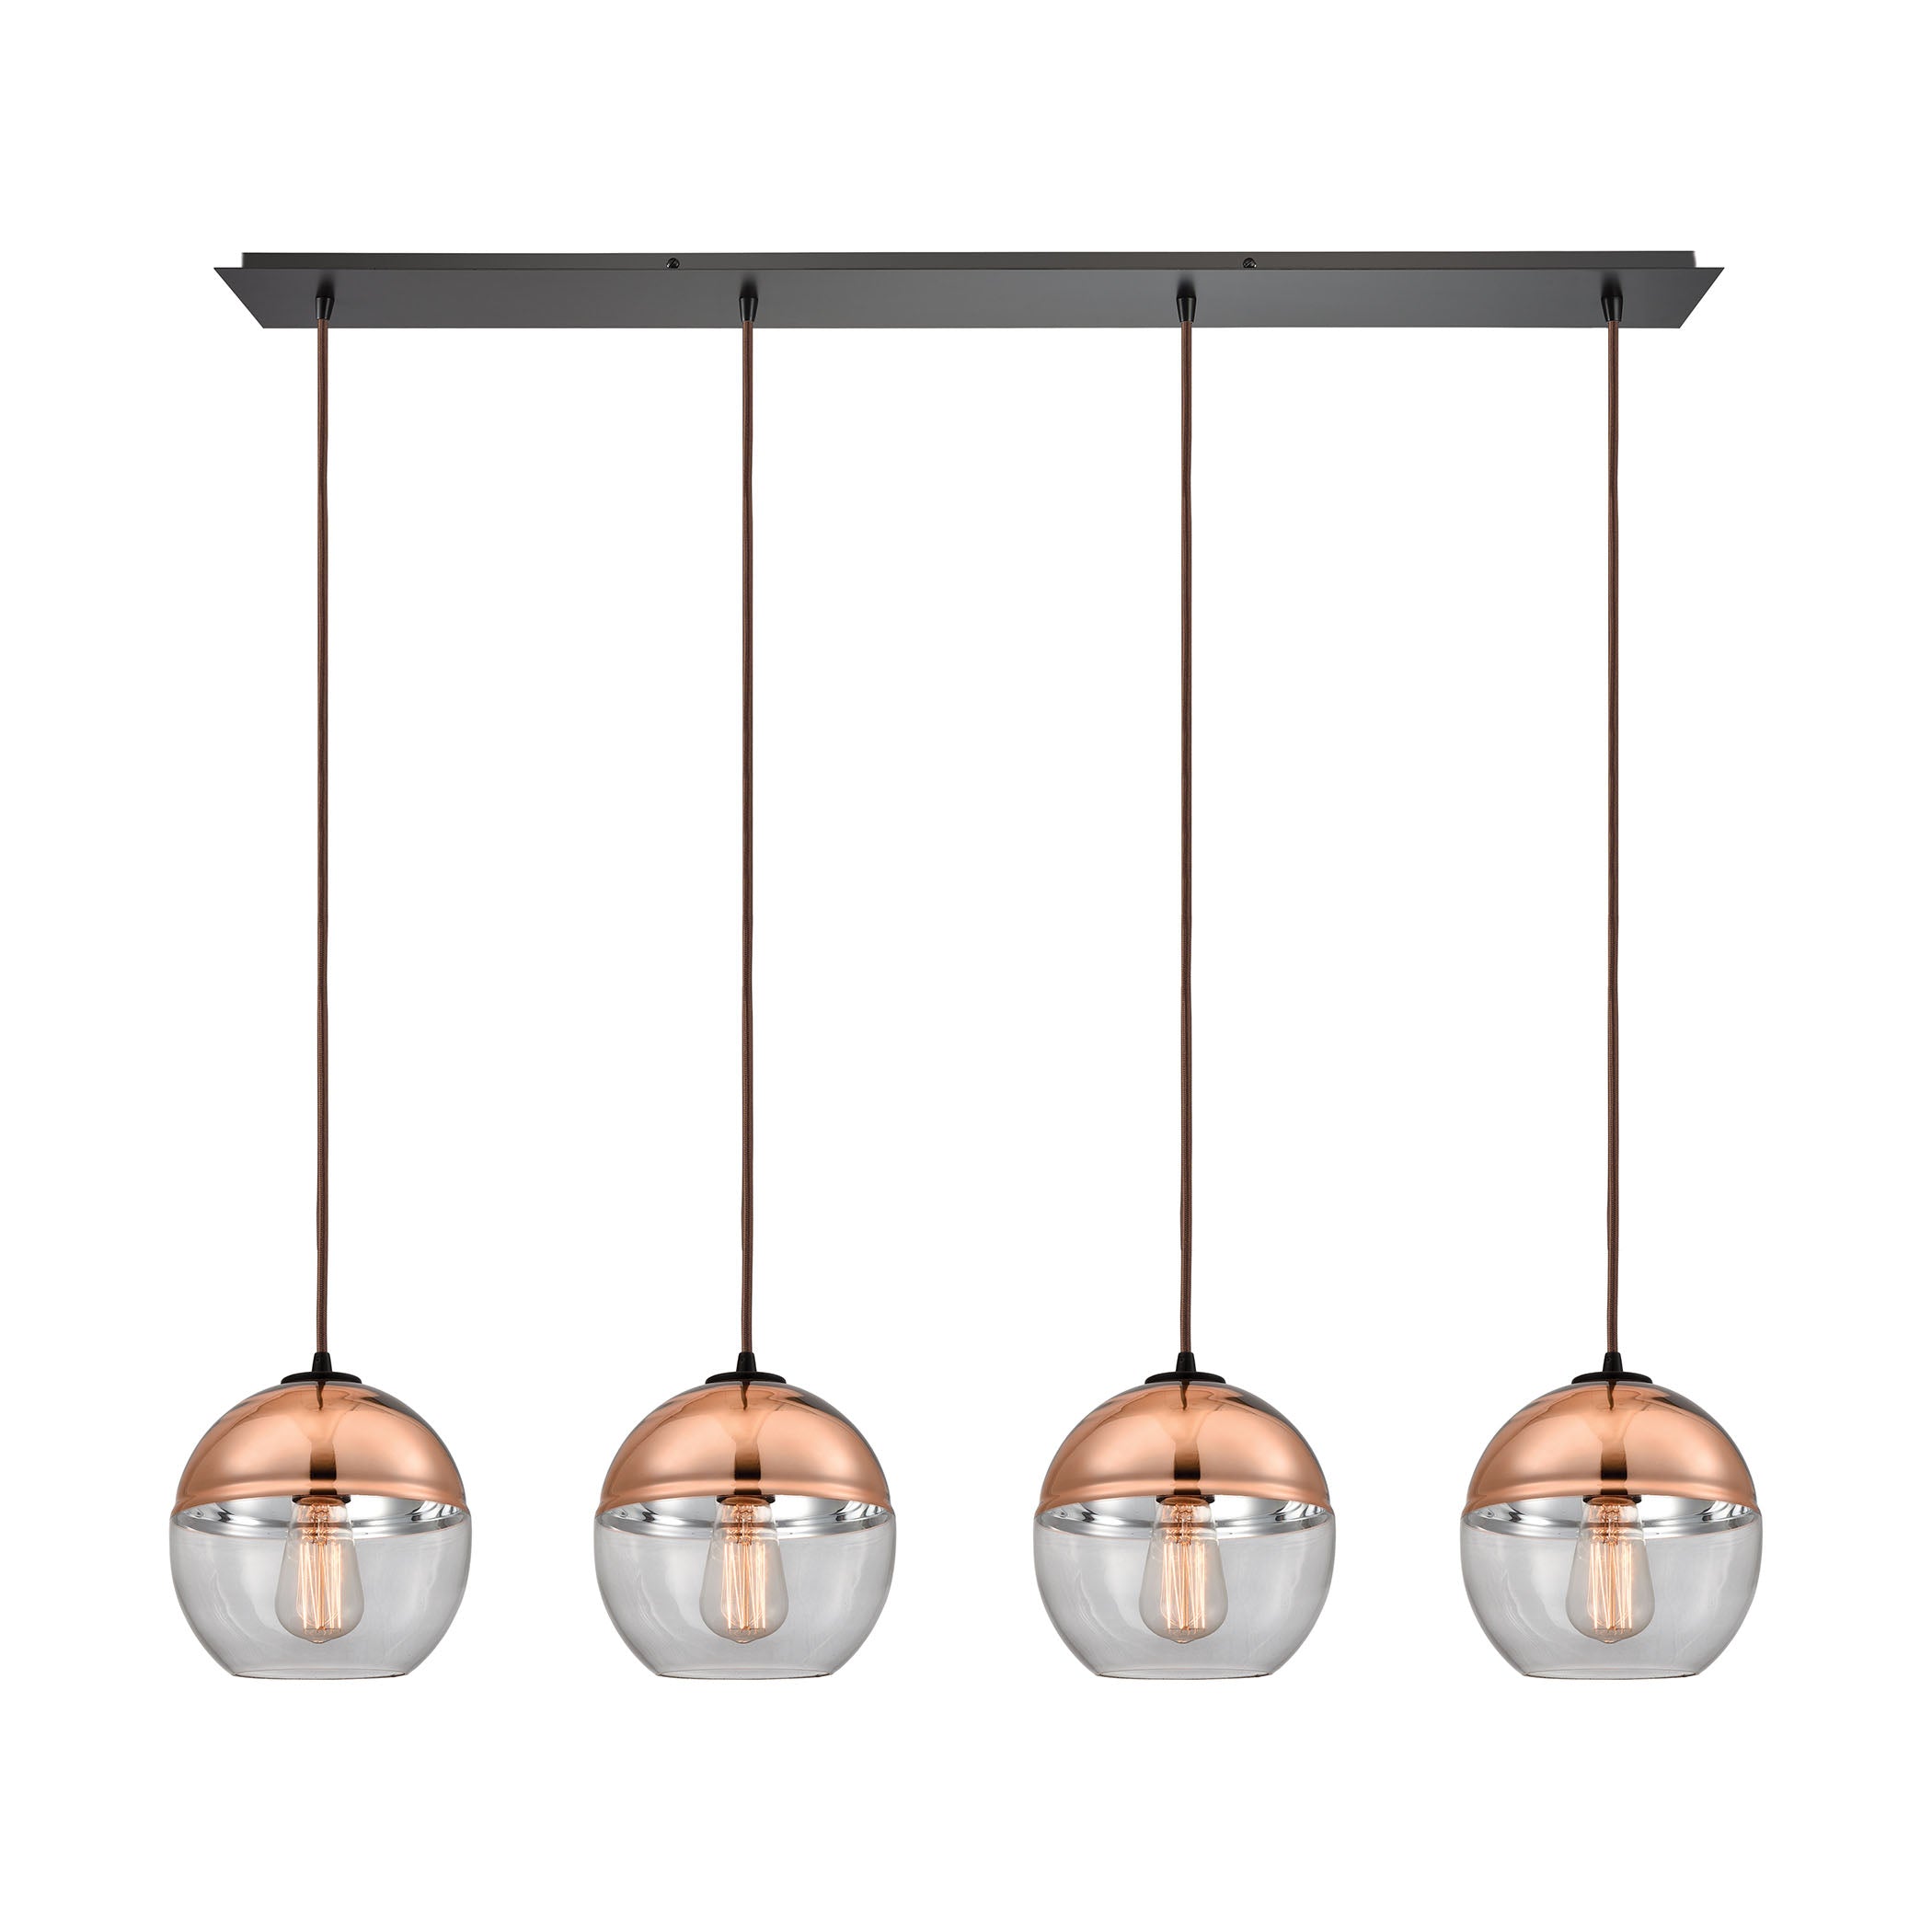 ELK Lighting 10490/4LP Revelo 4-Light Linear Pendant Fixture in Oil Rubbed Bronze with Clear and Copper-plated Glass